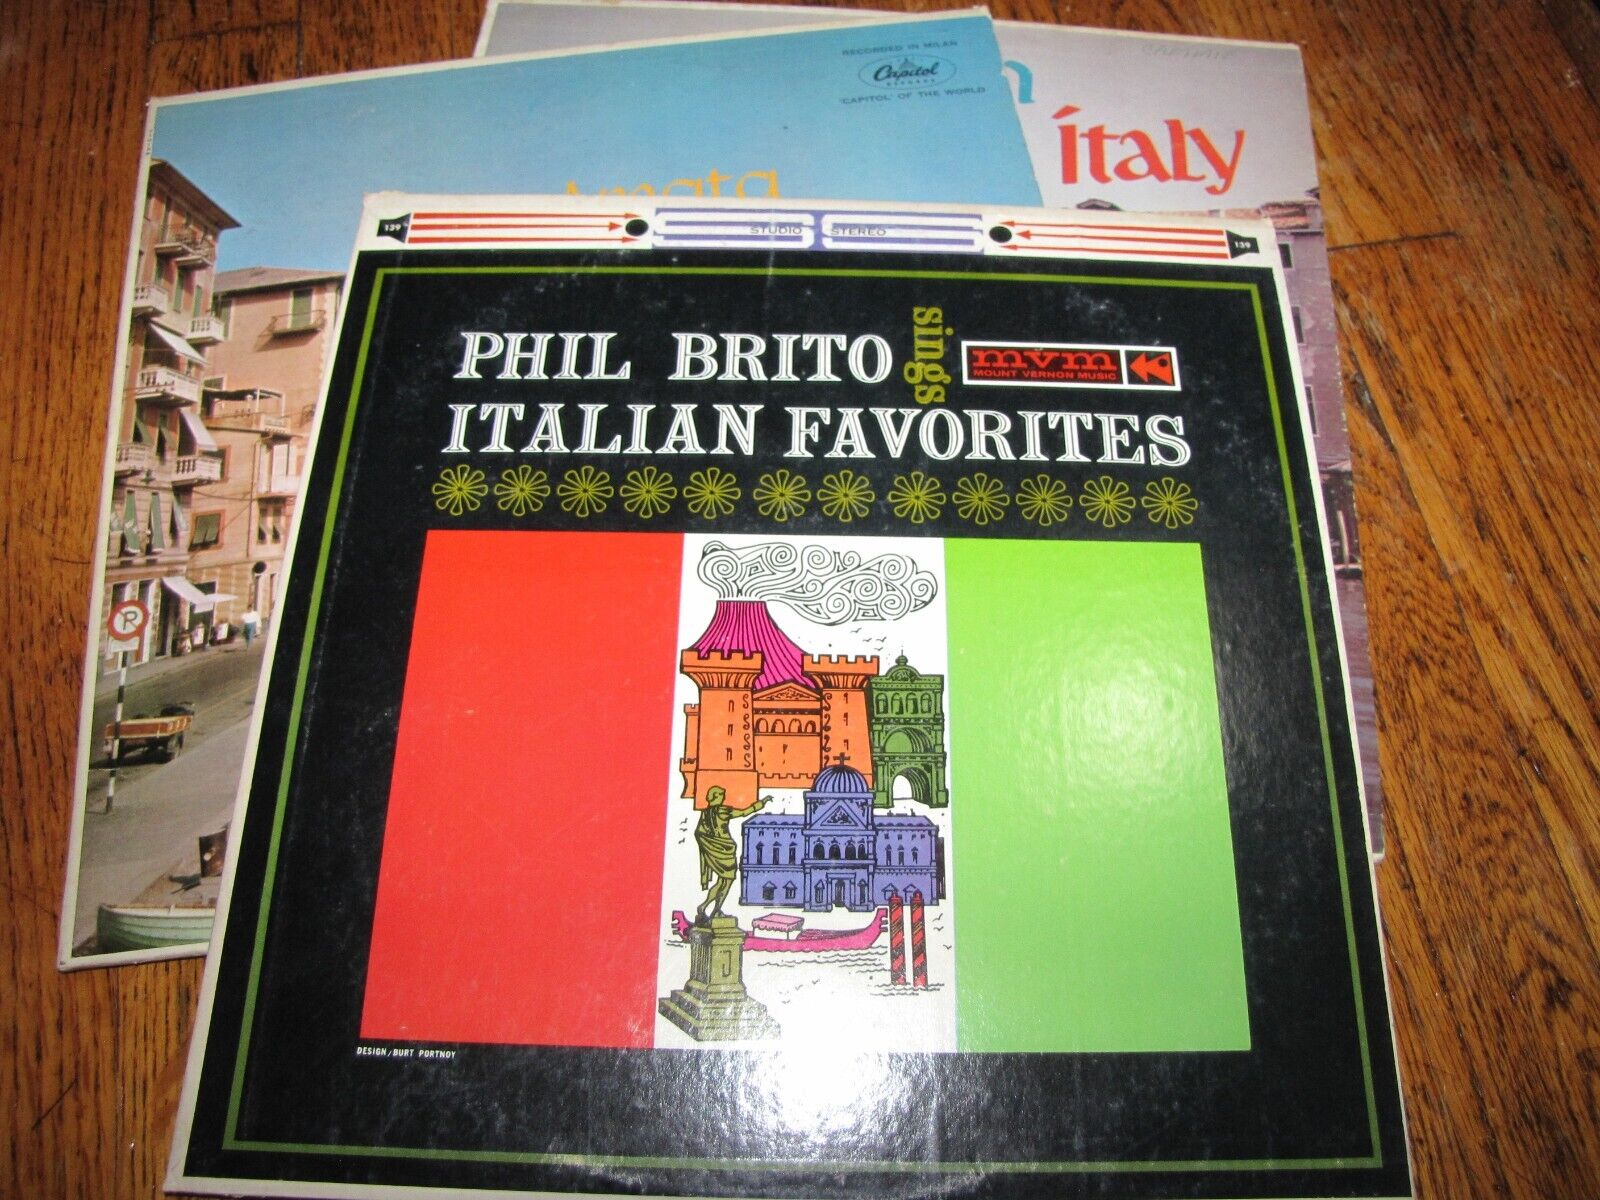 COLLECTION OF VINTAGE ITALIAN POP MUSIC - LOT OF 3 LPS  - VARIOUS ARTIST